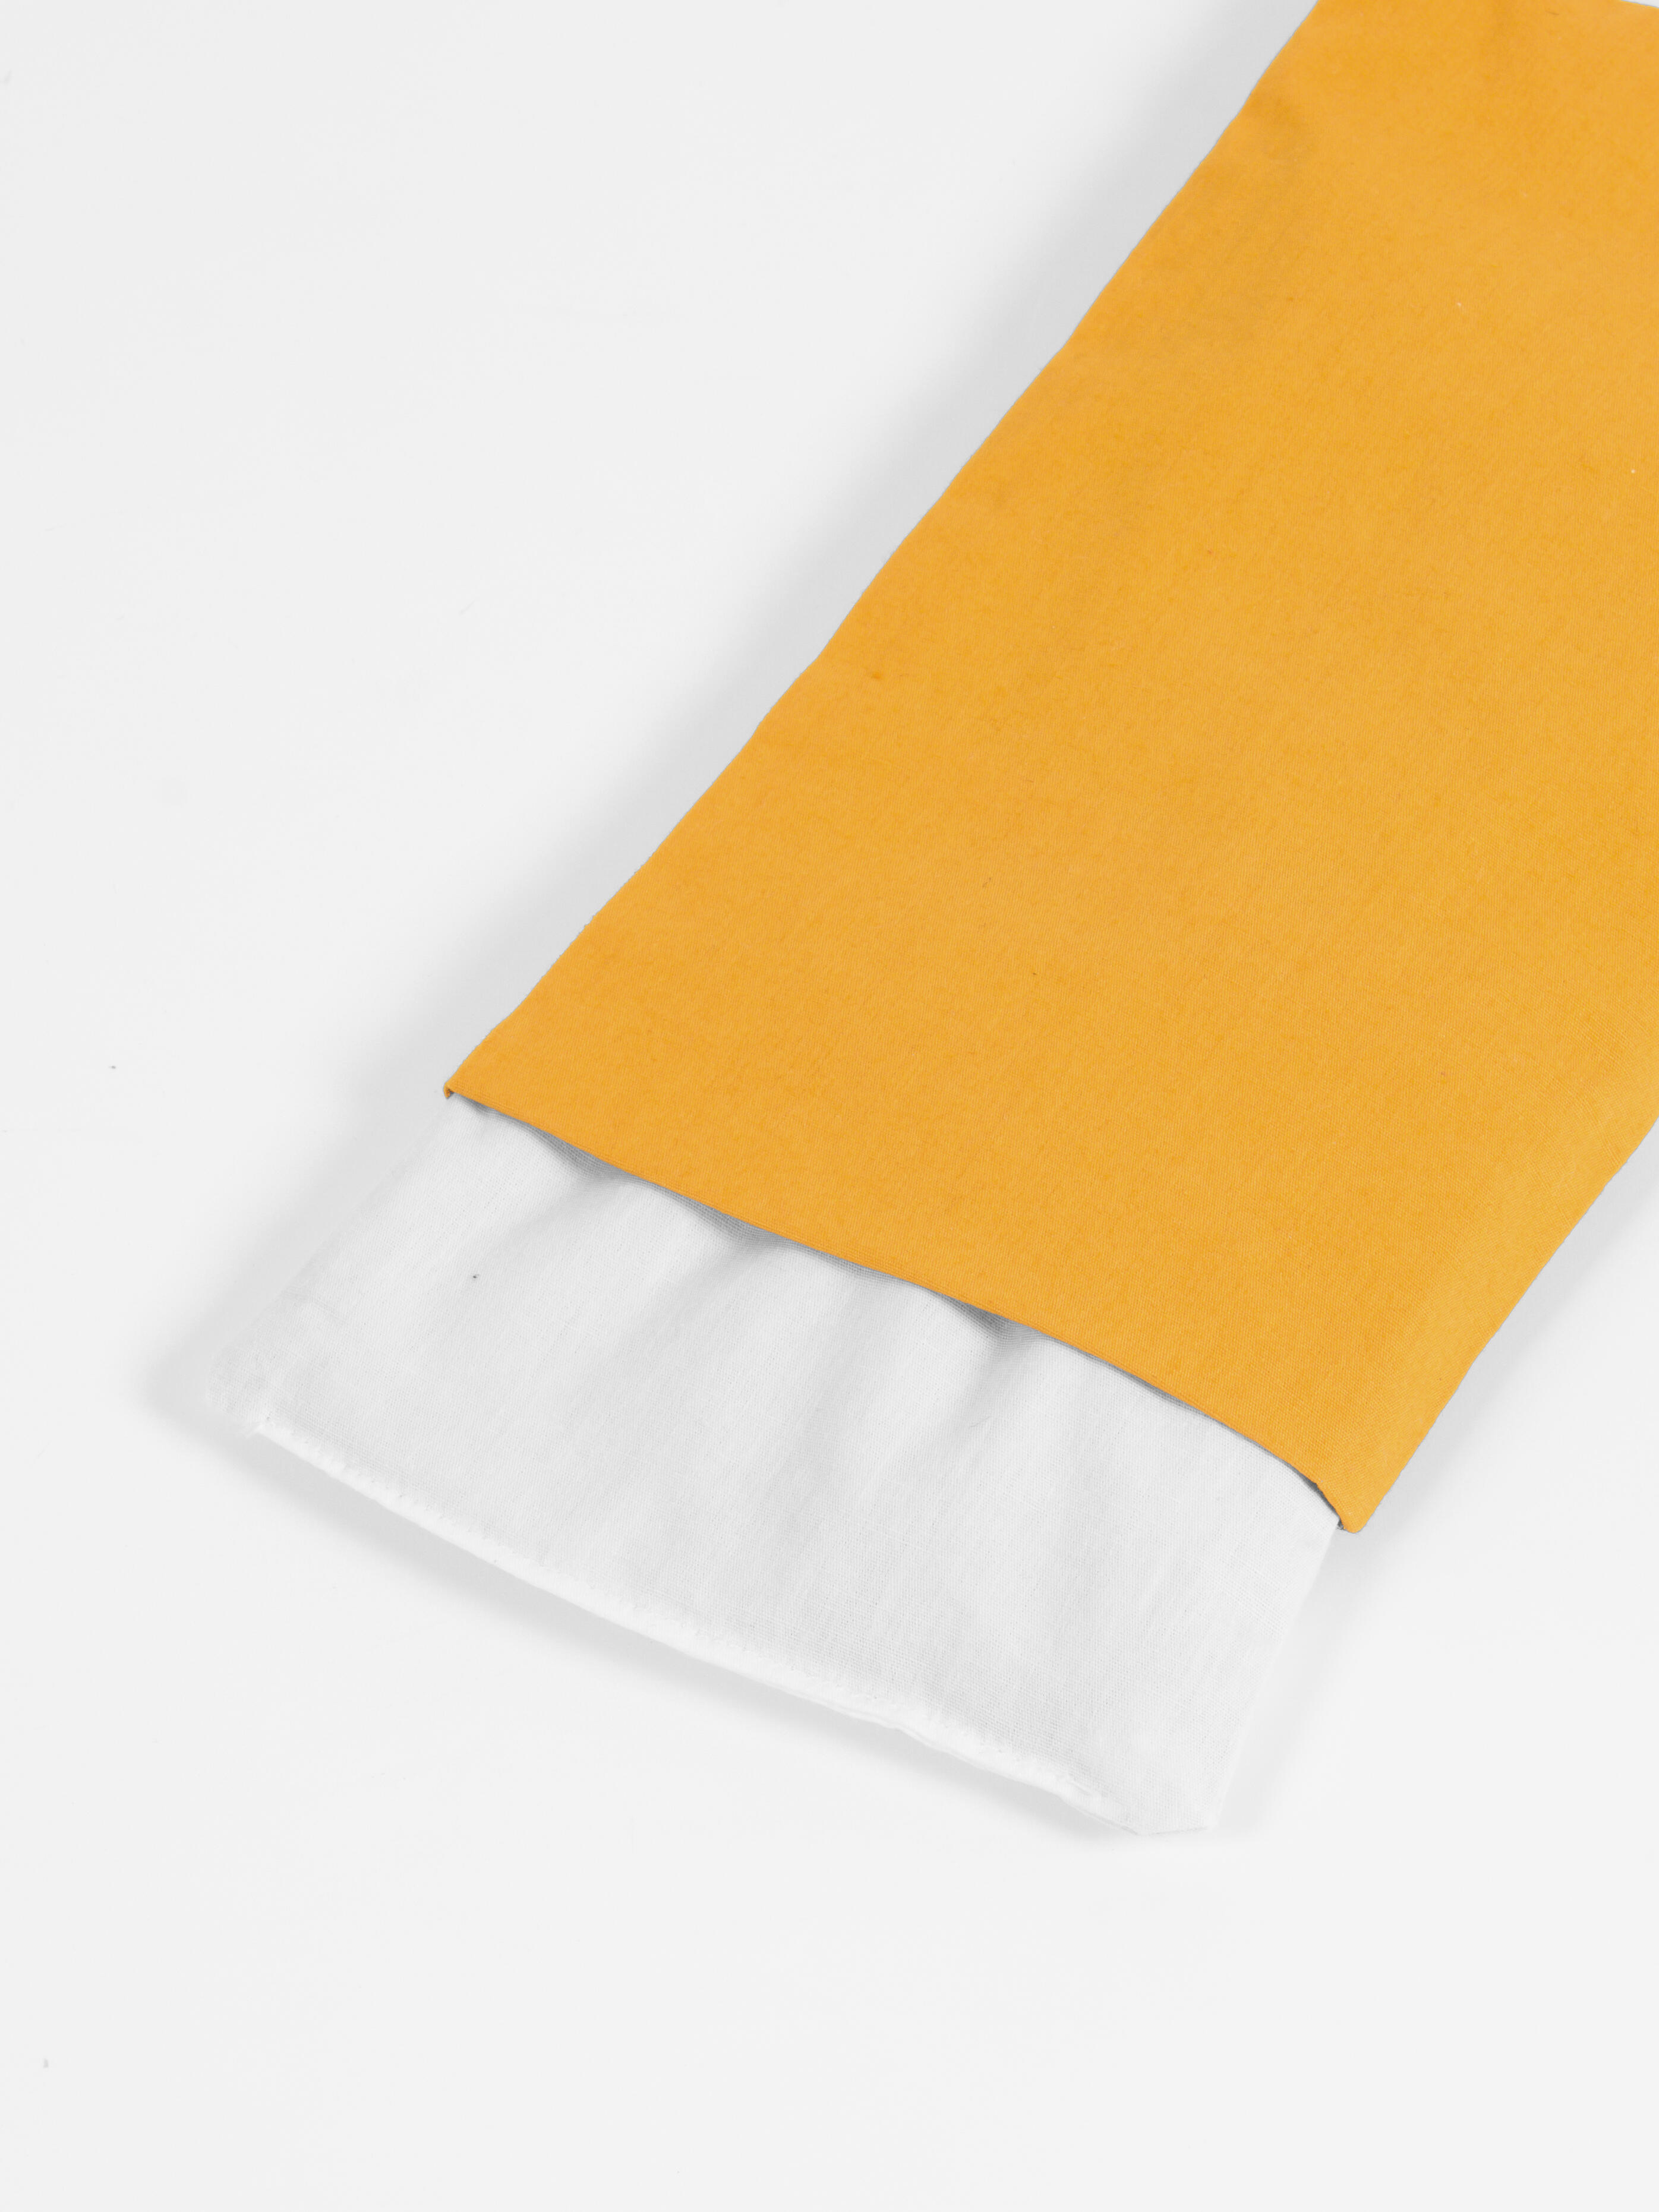 Yoga Studio Scented Lavender & Linseed Eye Pillows - Yellow 2/2